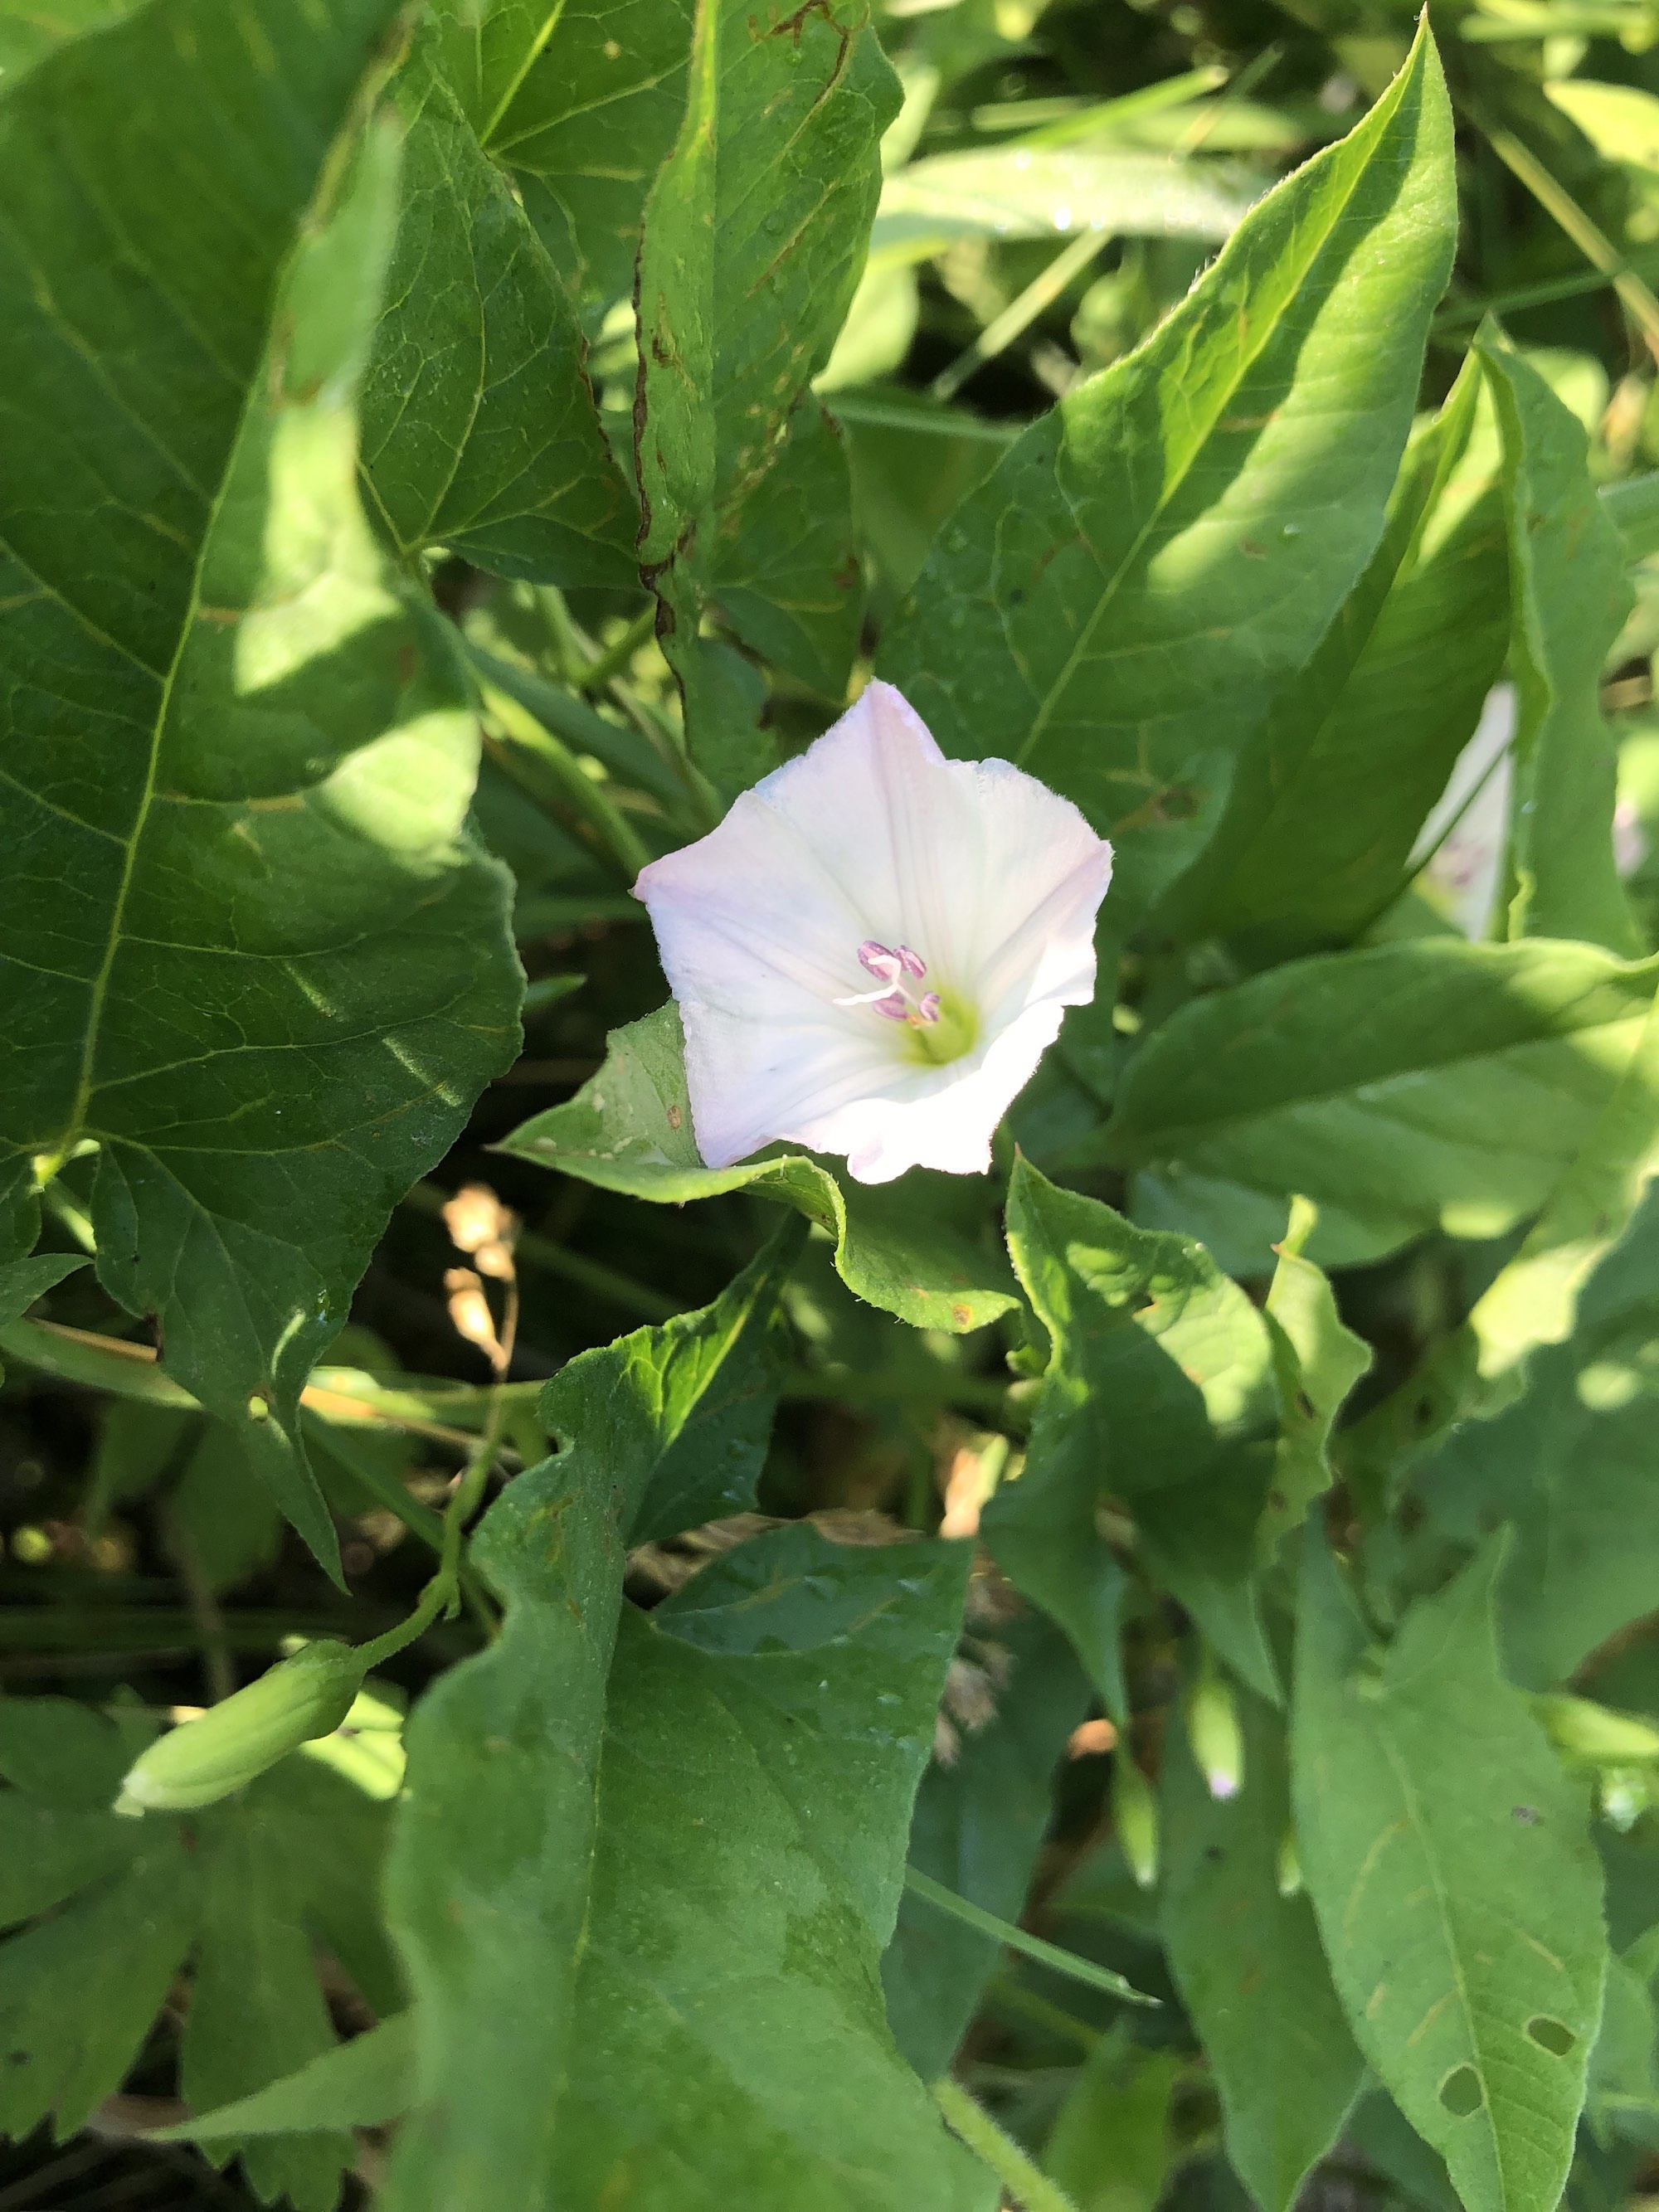 Field Bindweed on shore of Marion Dunn Pond in Madison, Wisconsin on June 12, 2021.